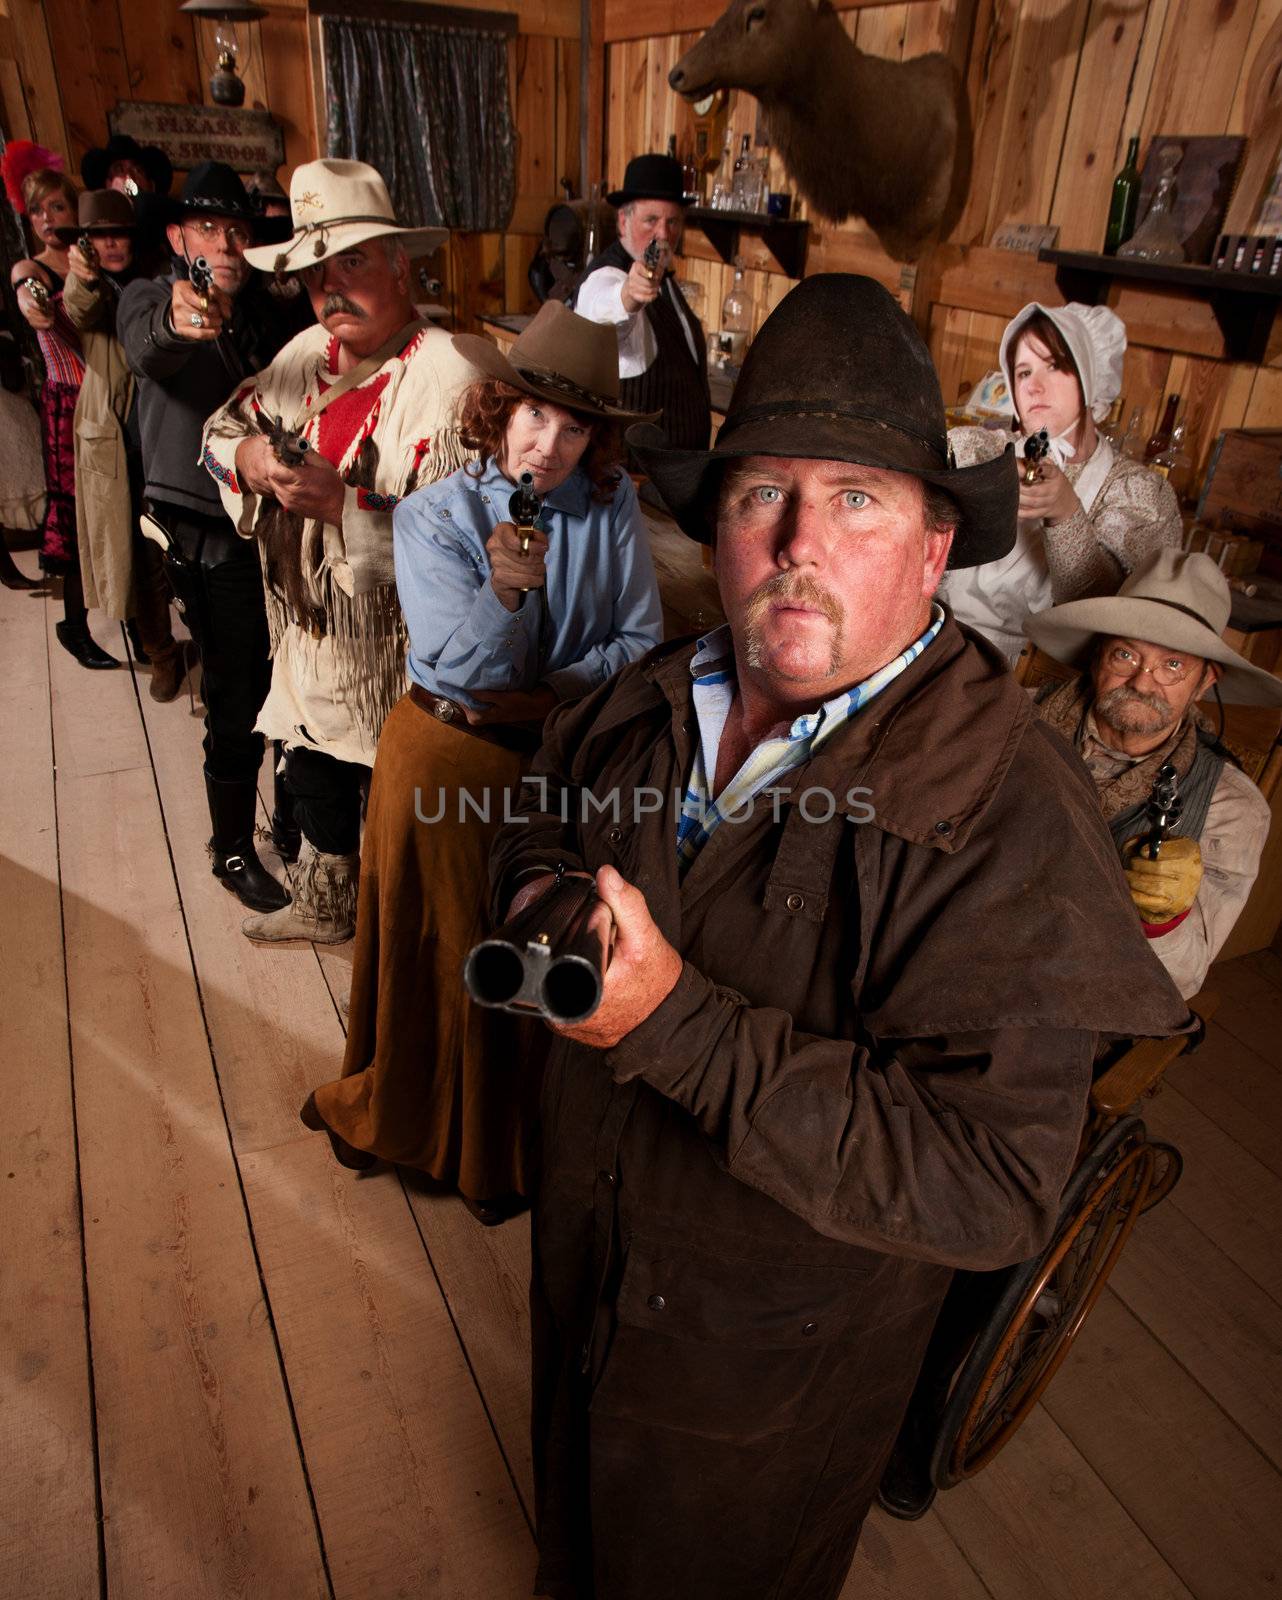 The entire saloon points their guns at an unseen danger.